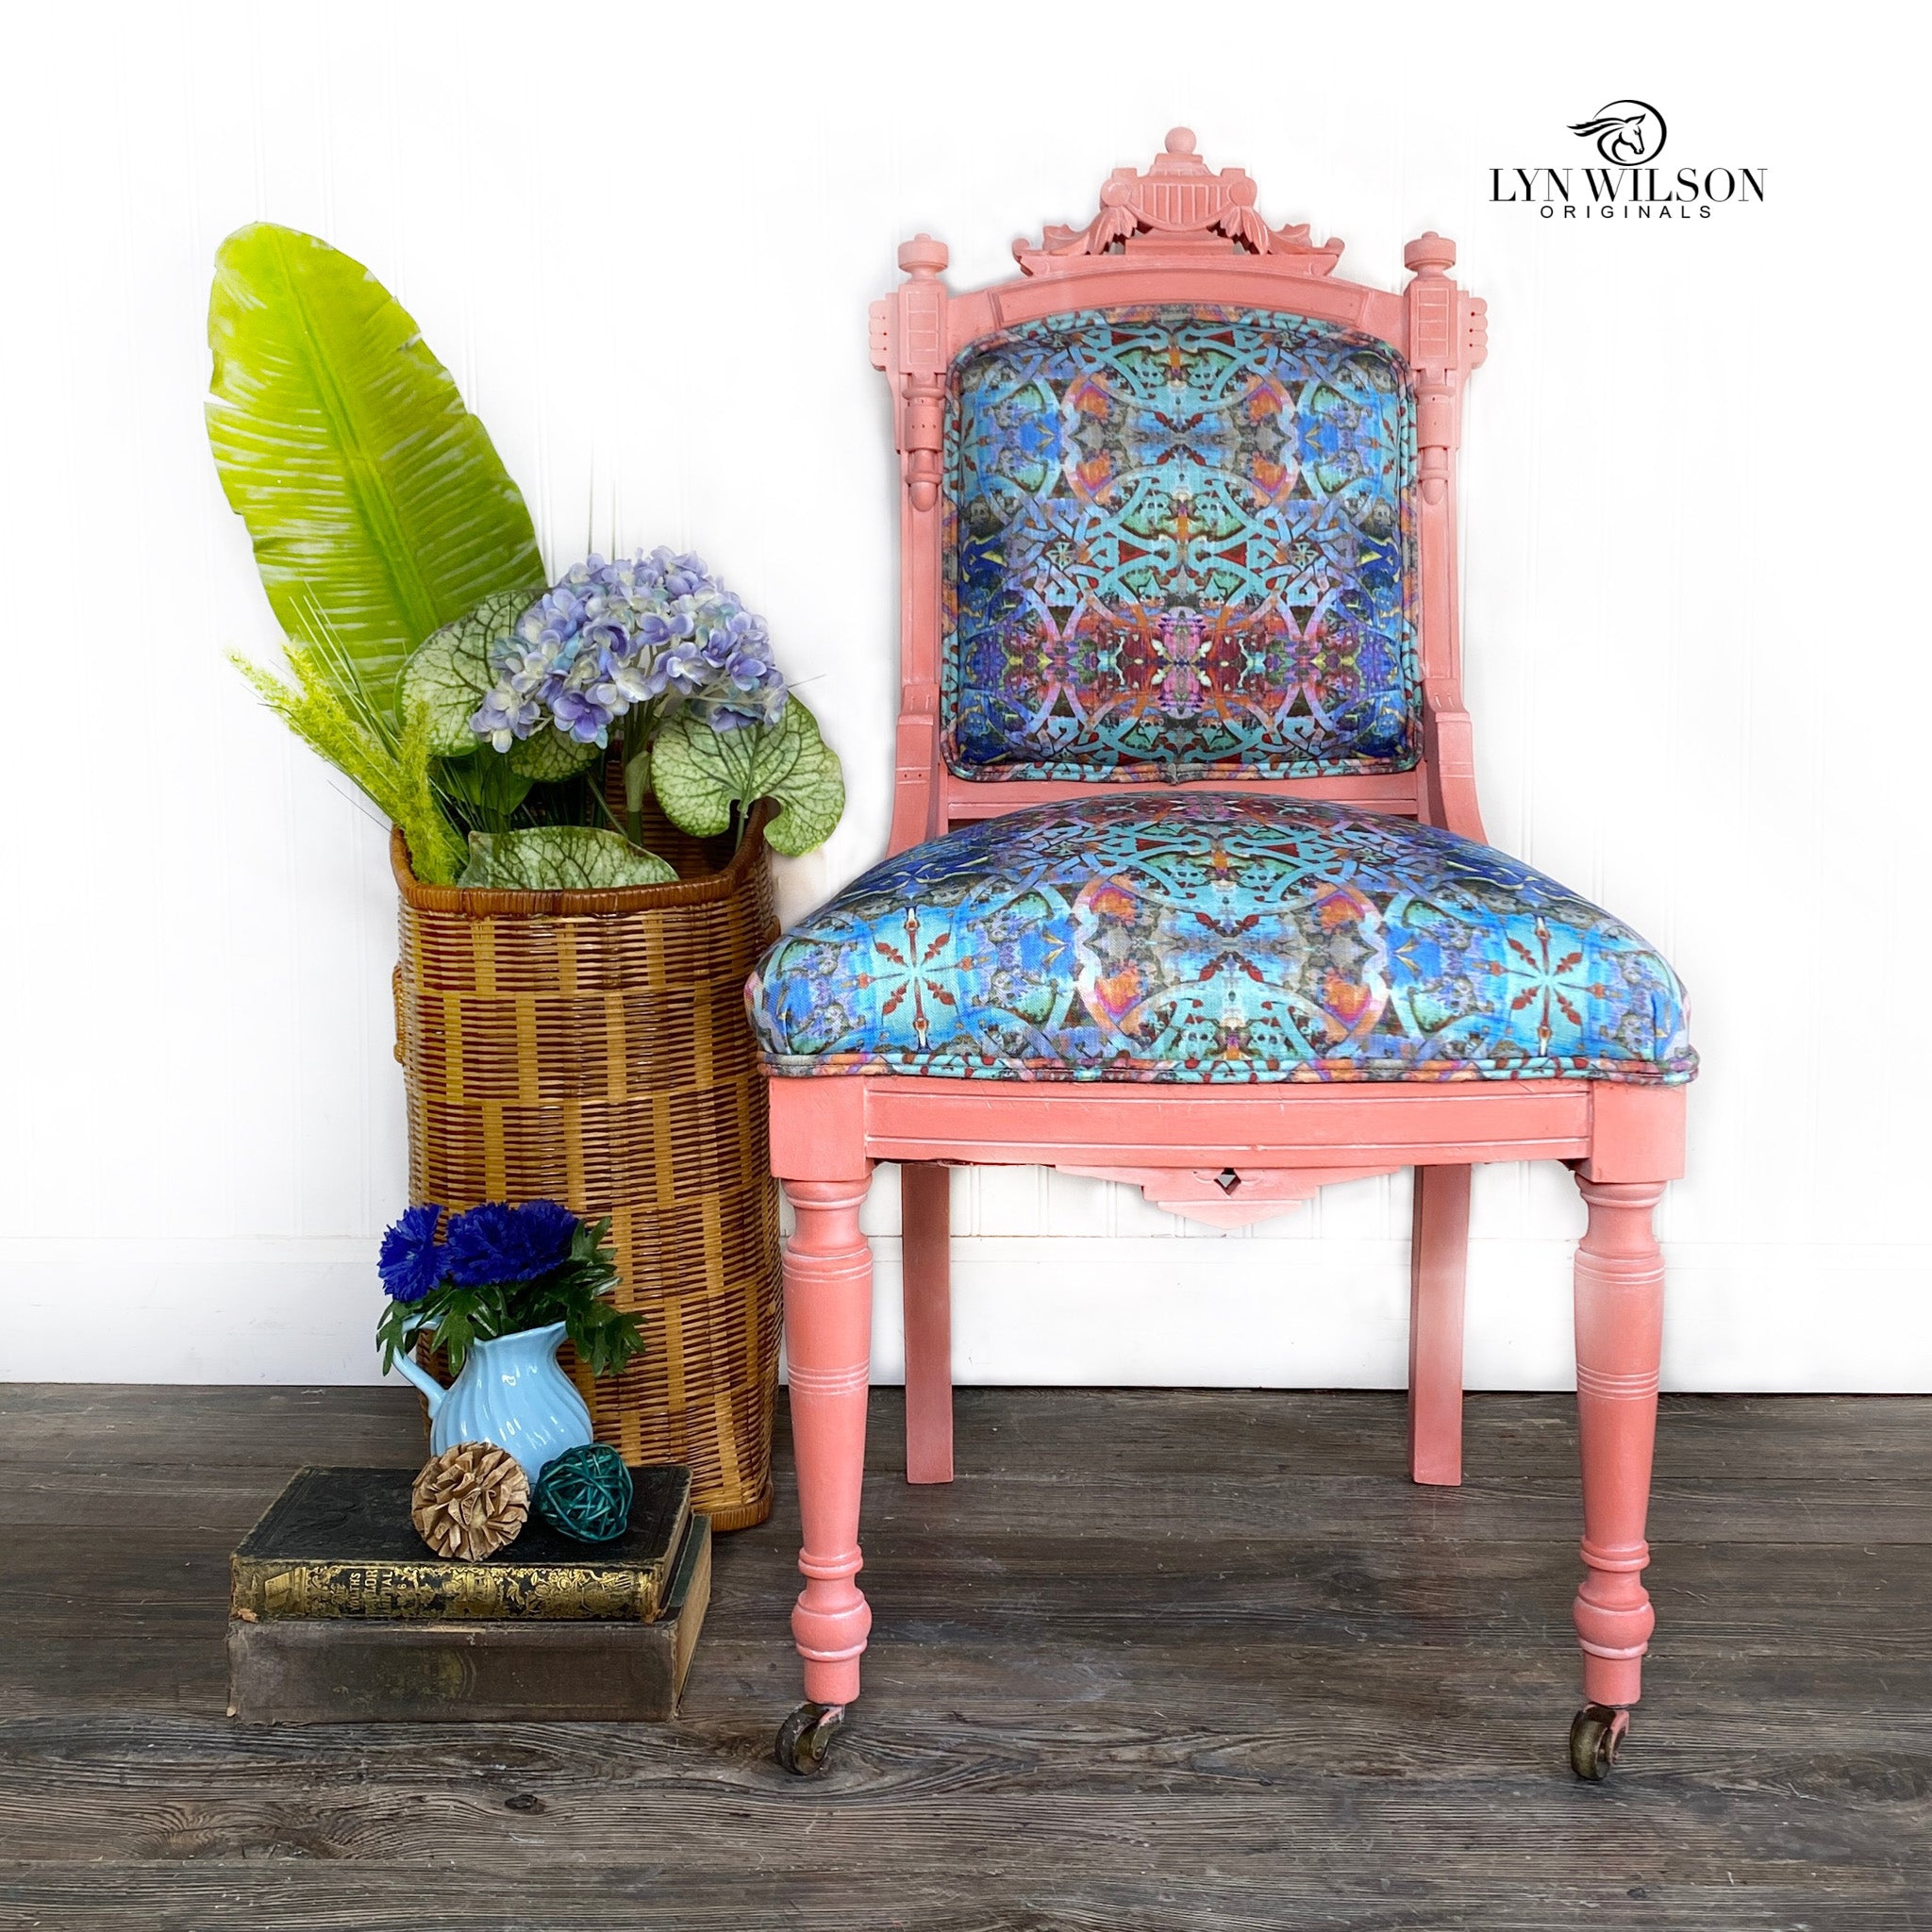 A vintage chair refurbished by Lyn Wilson Originals is painted in Dixie Belle's Flamingo chalk mineral paint and has a light blue patterned material on the seat and back cushion.